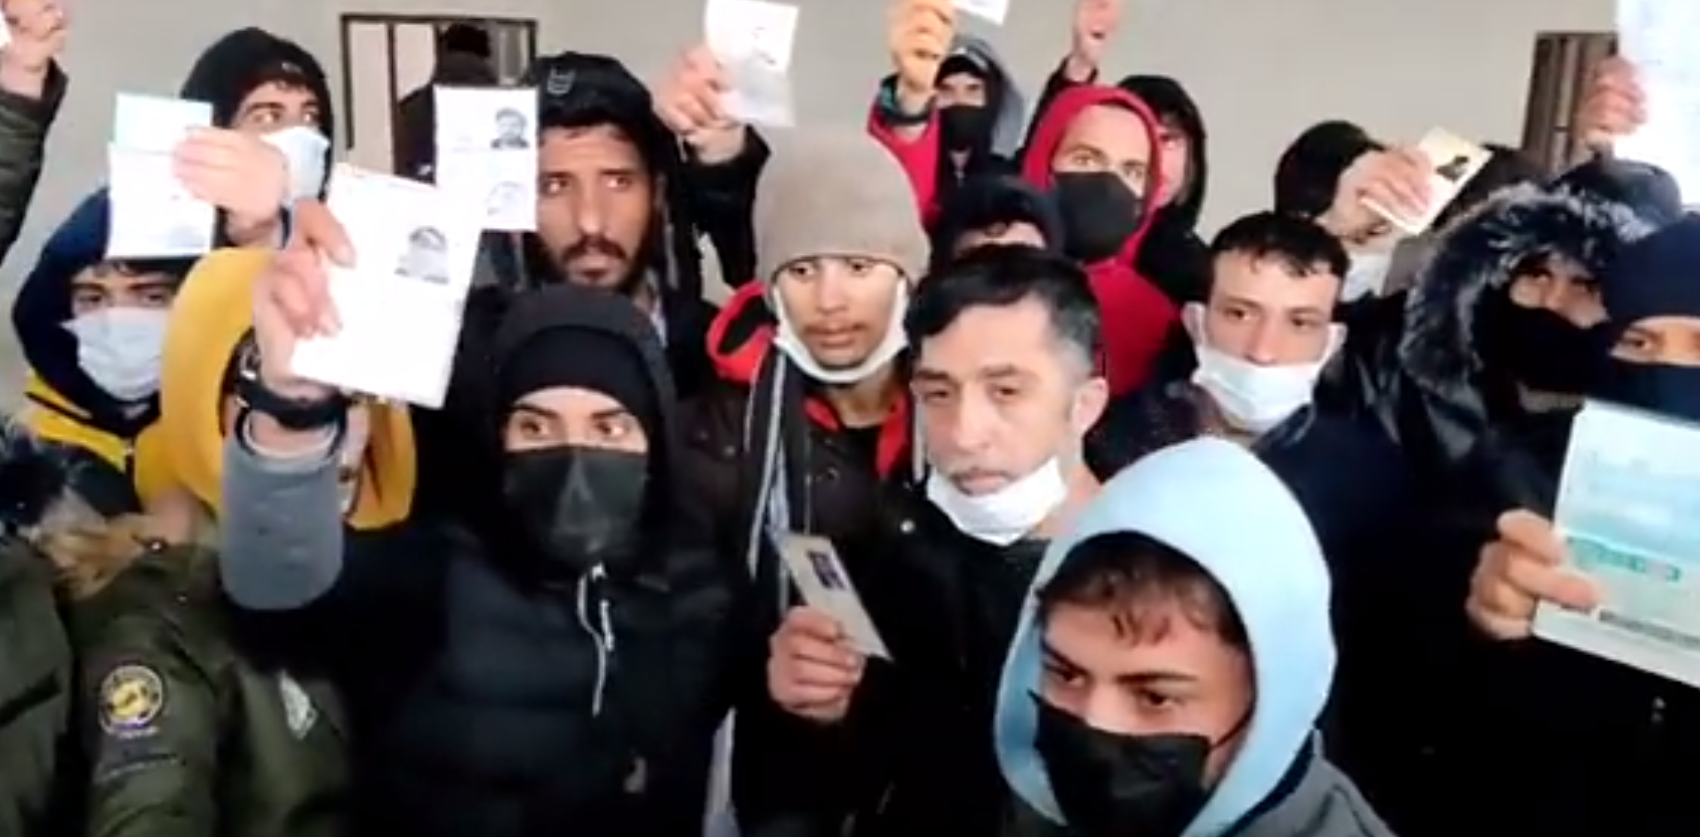 Turkey: Videos of Syrian Young Men Deported; Activist Explains